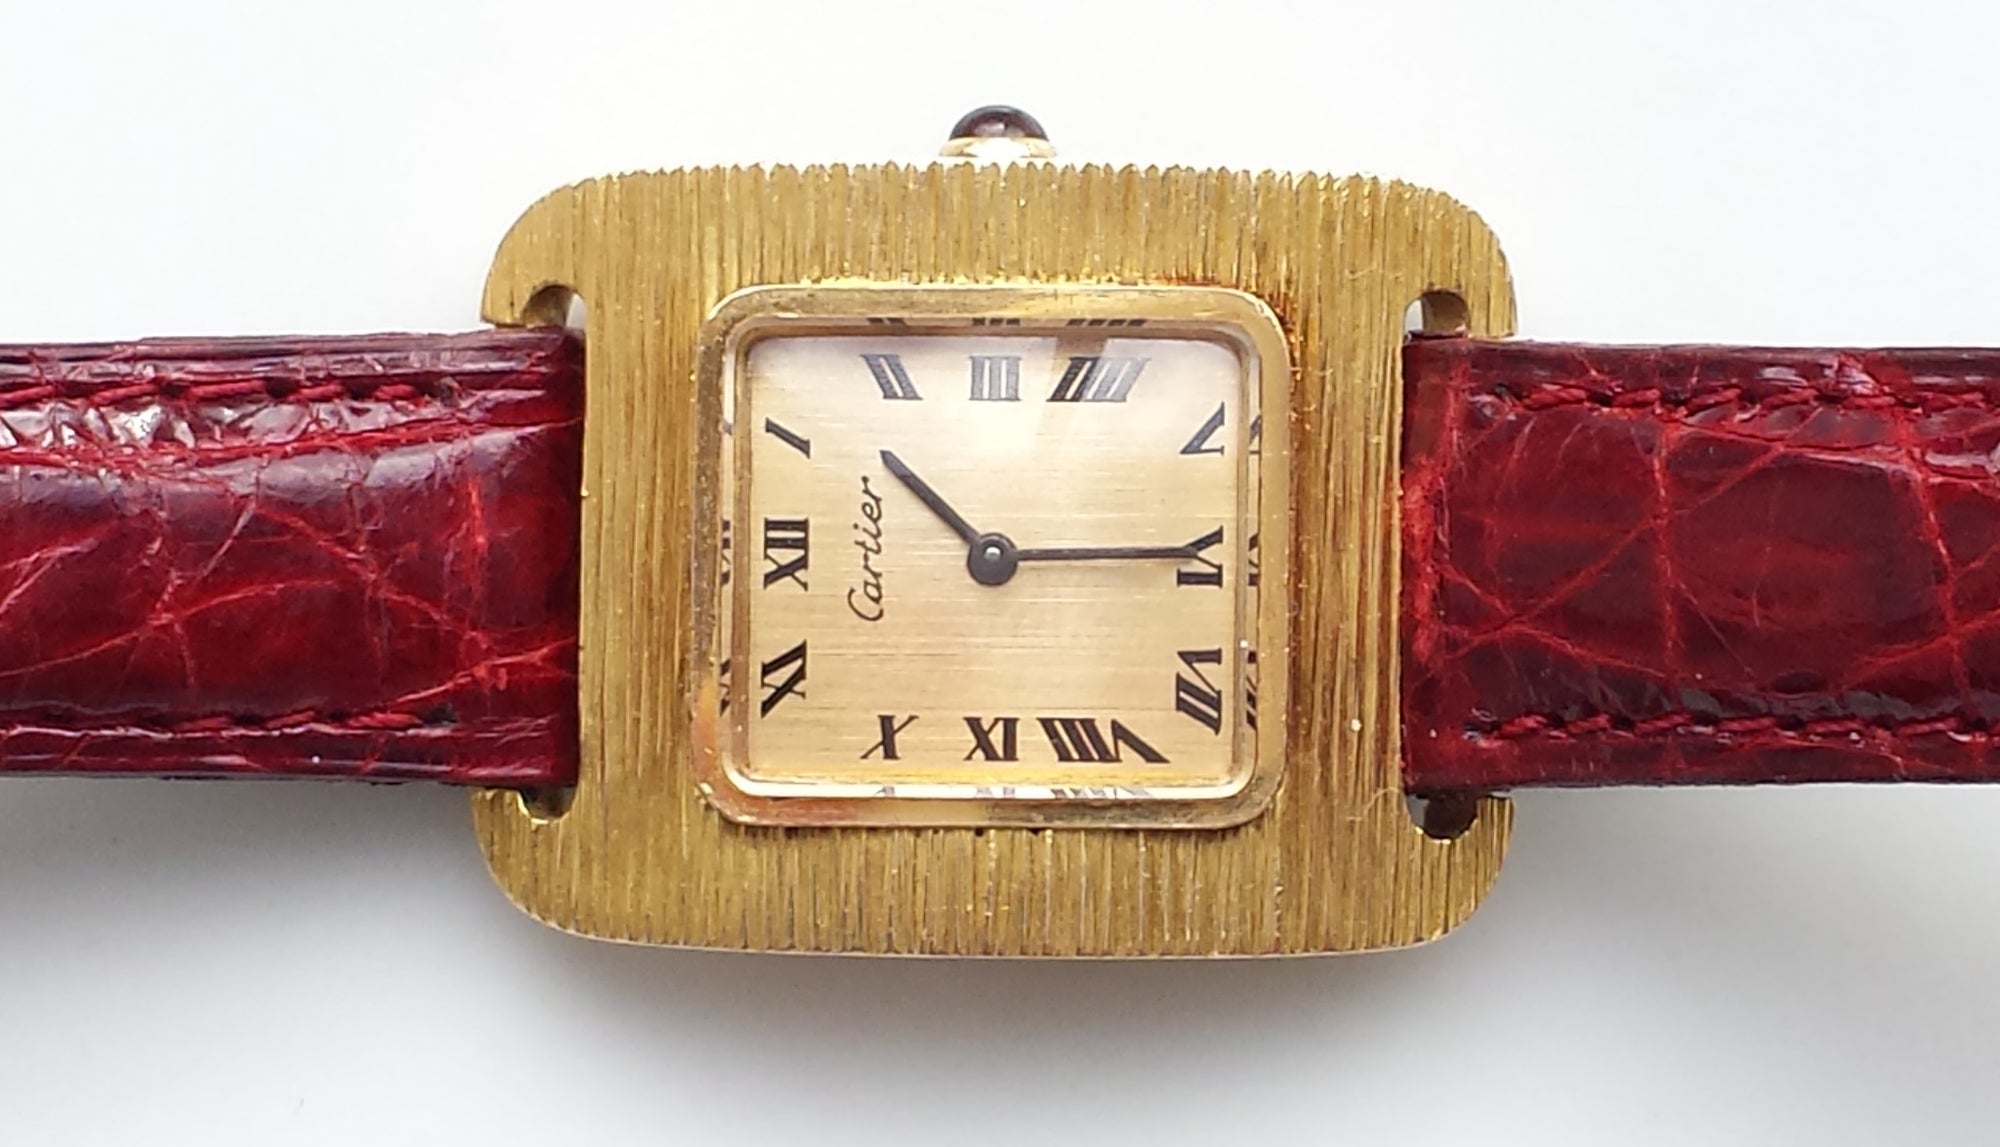 Cartier 1970s Vintage Solid 18K Gold Watch with 17 Jewel Swiss Movement